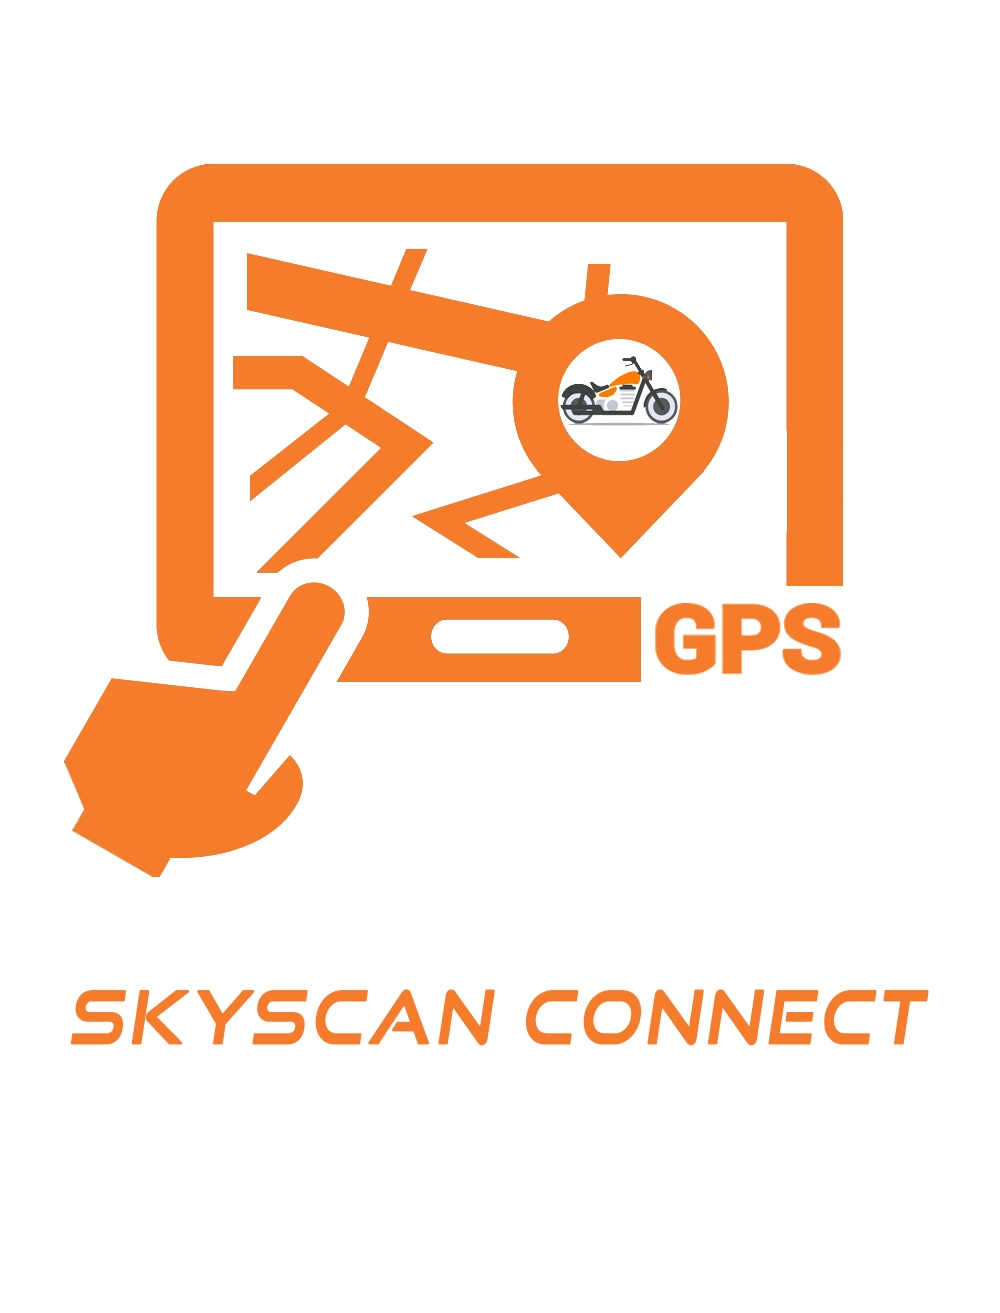 SKYSCAN CONNECT